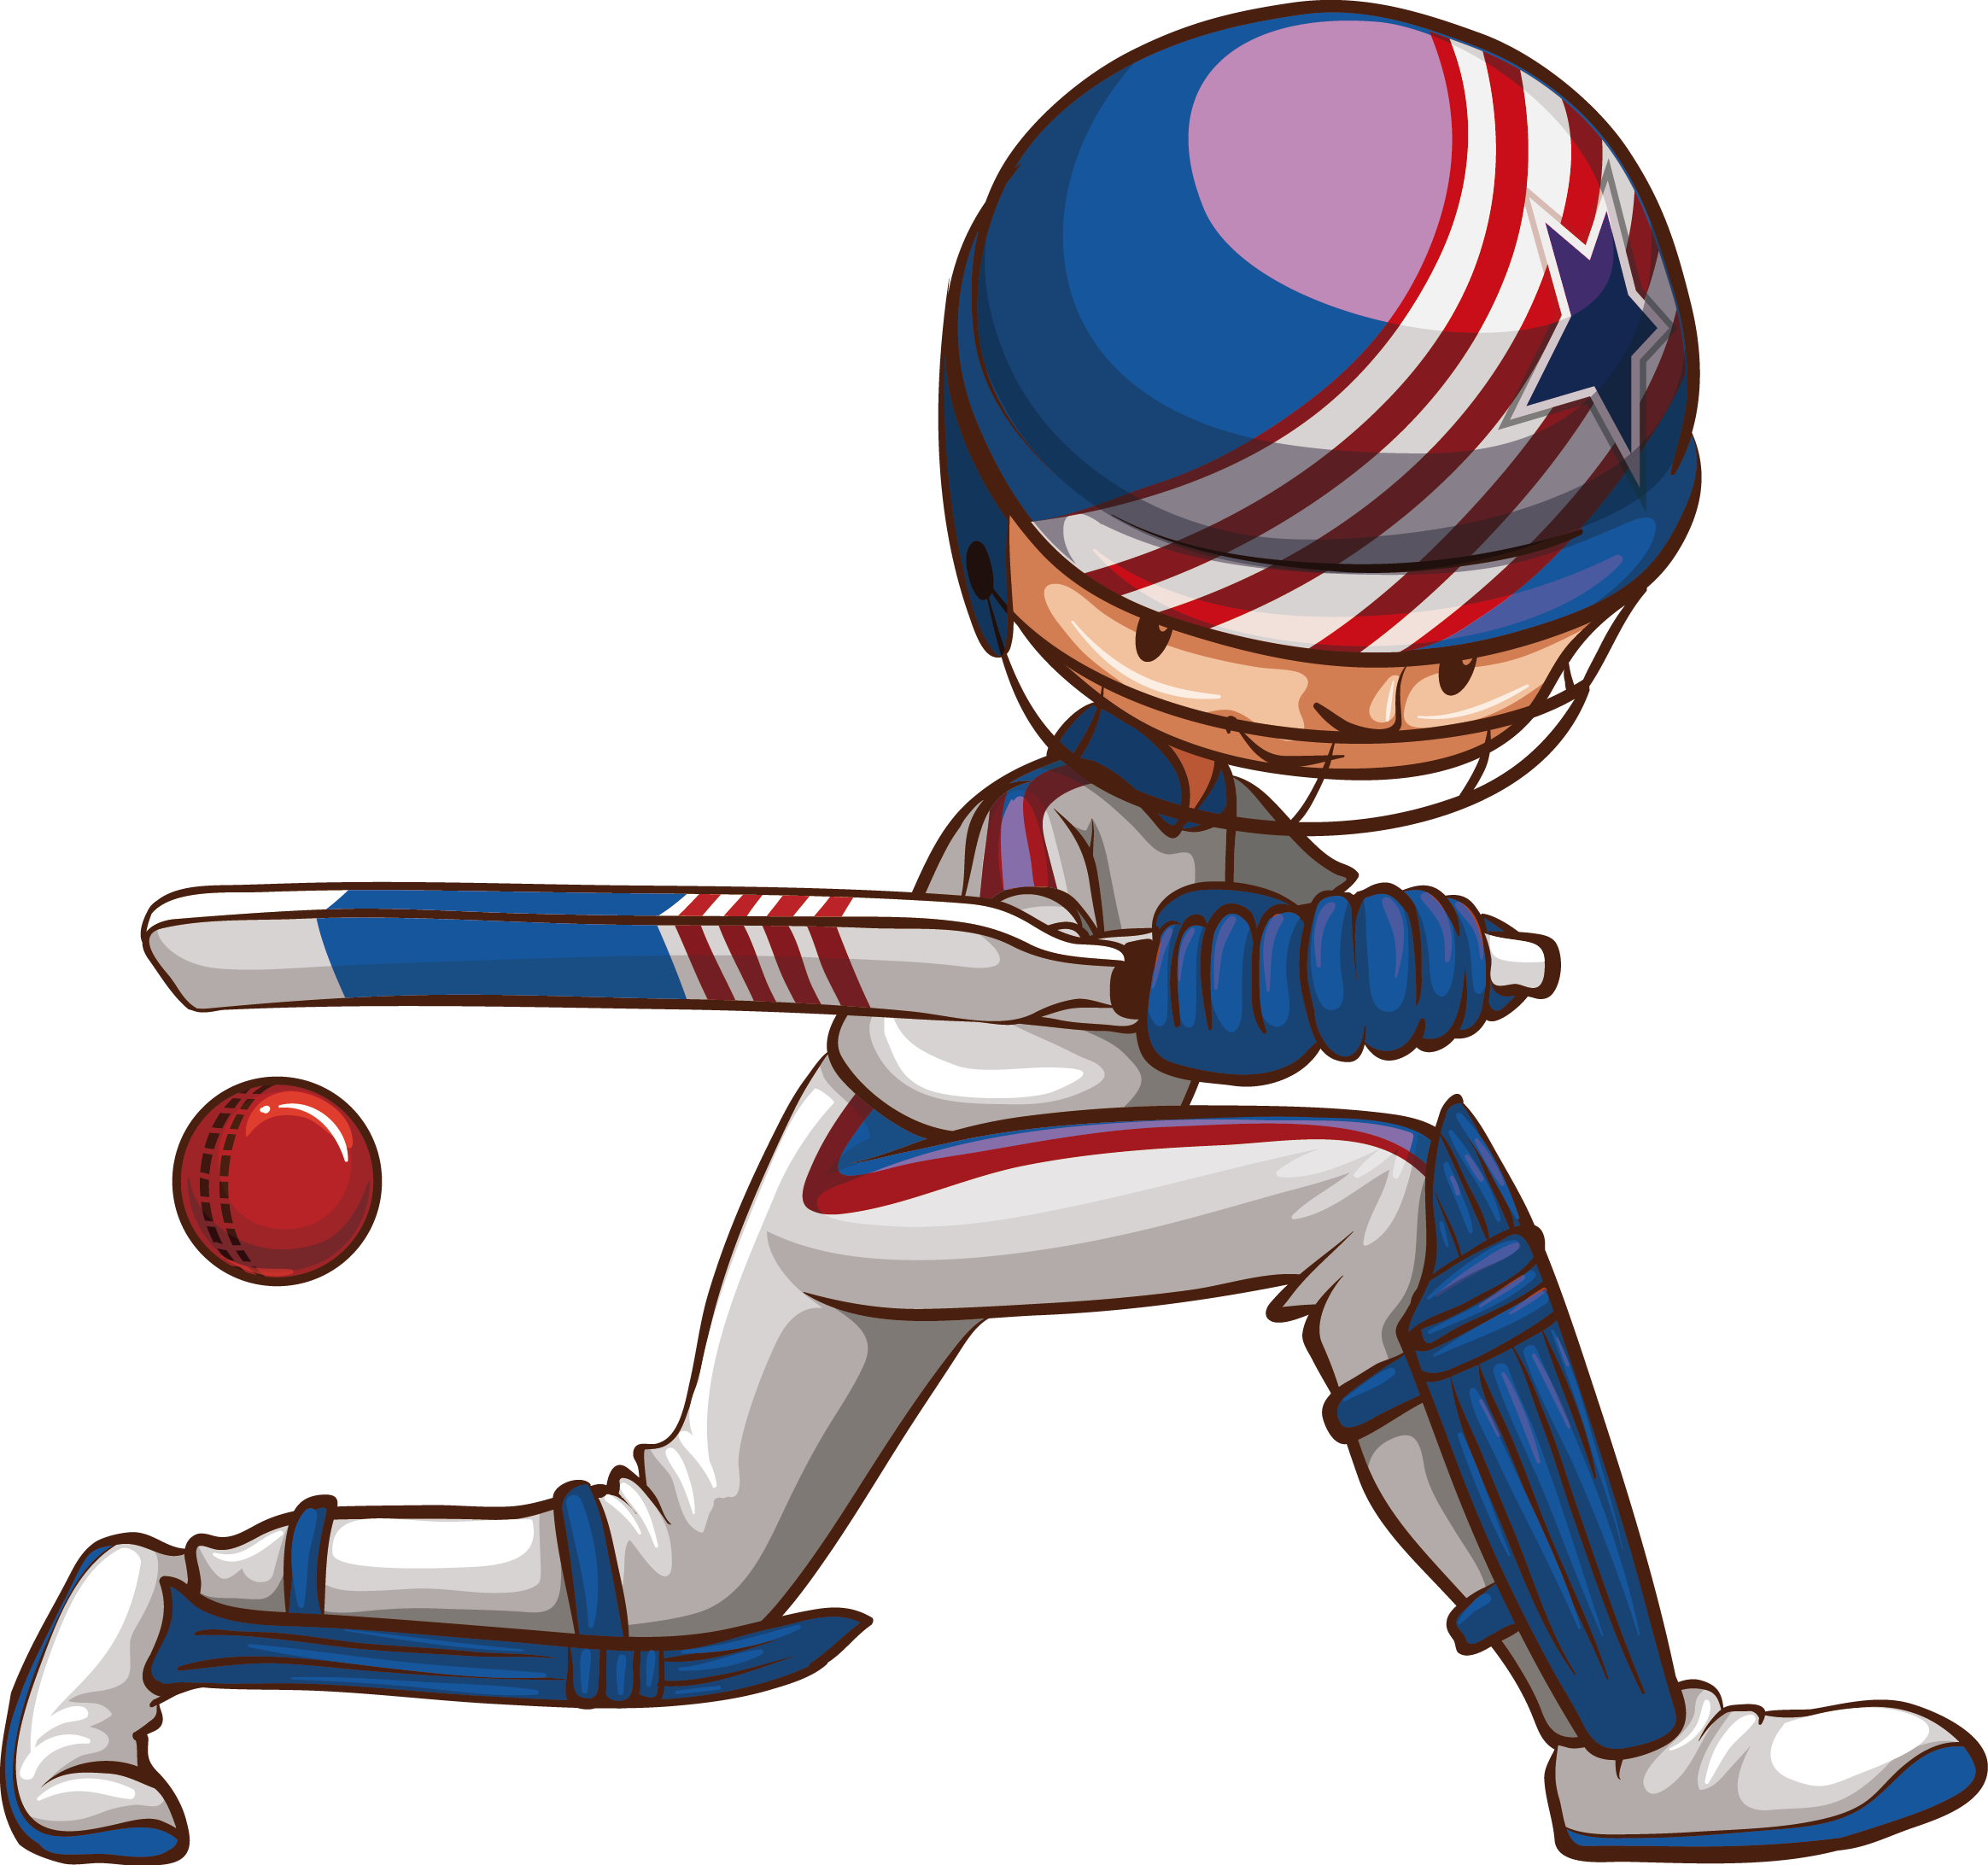 D20 clipart animated. Cricket practice graphics illustrations